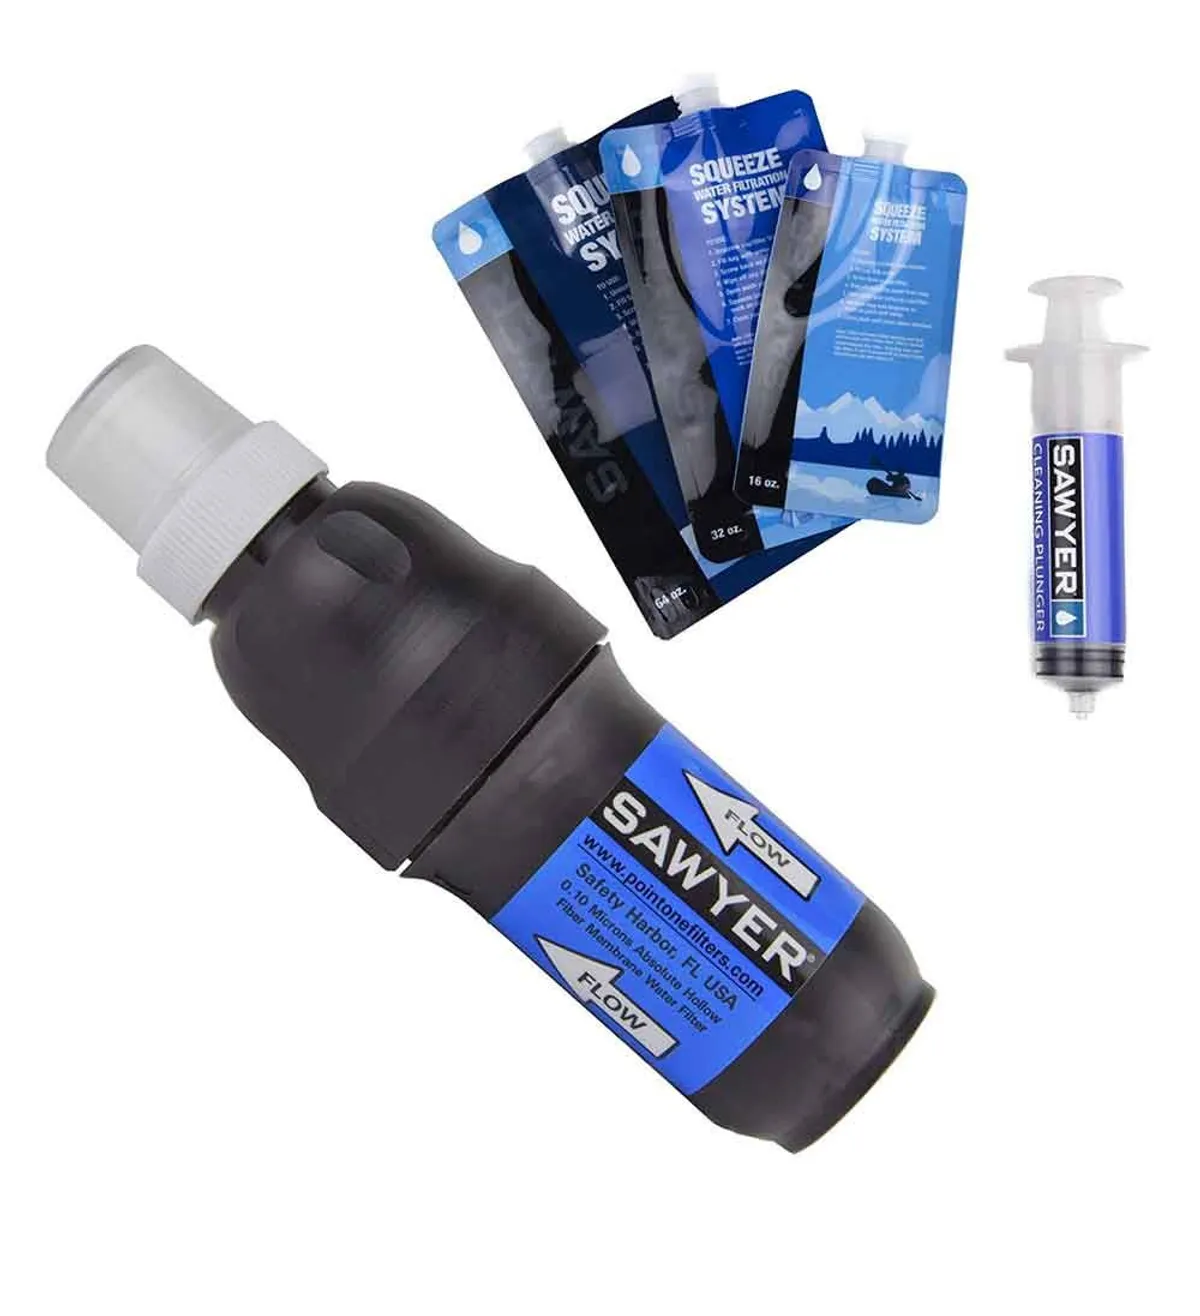 Sawyer Products SP131 PointOne Squeeze Water Filter System Review